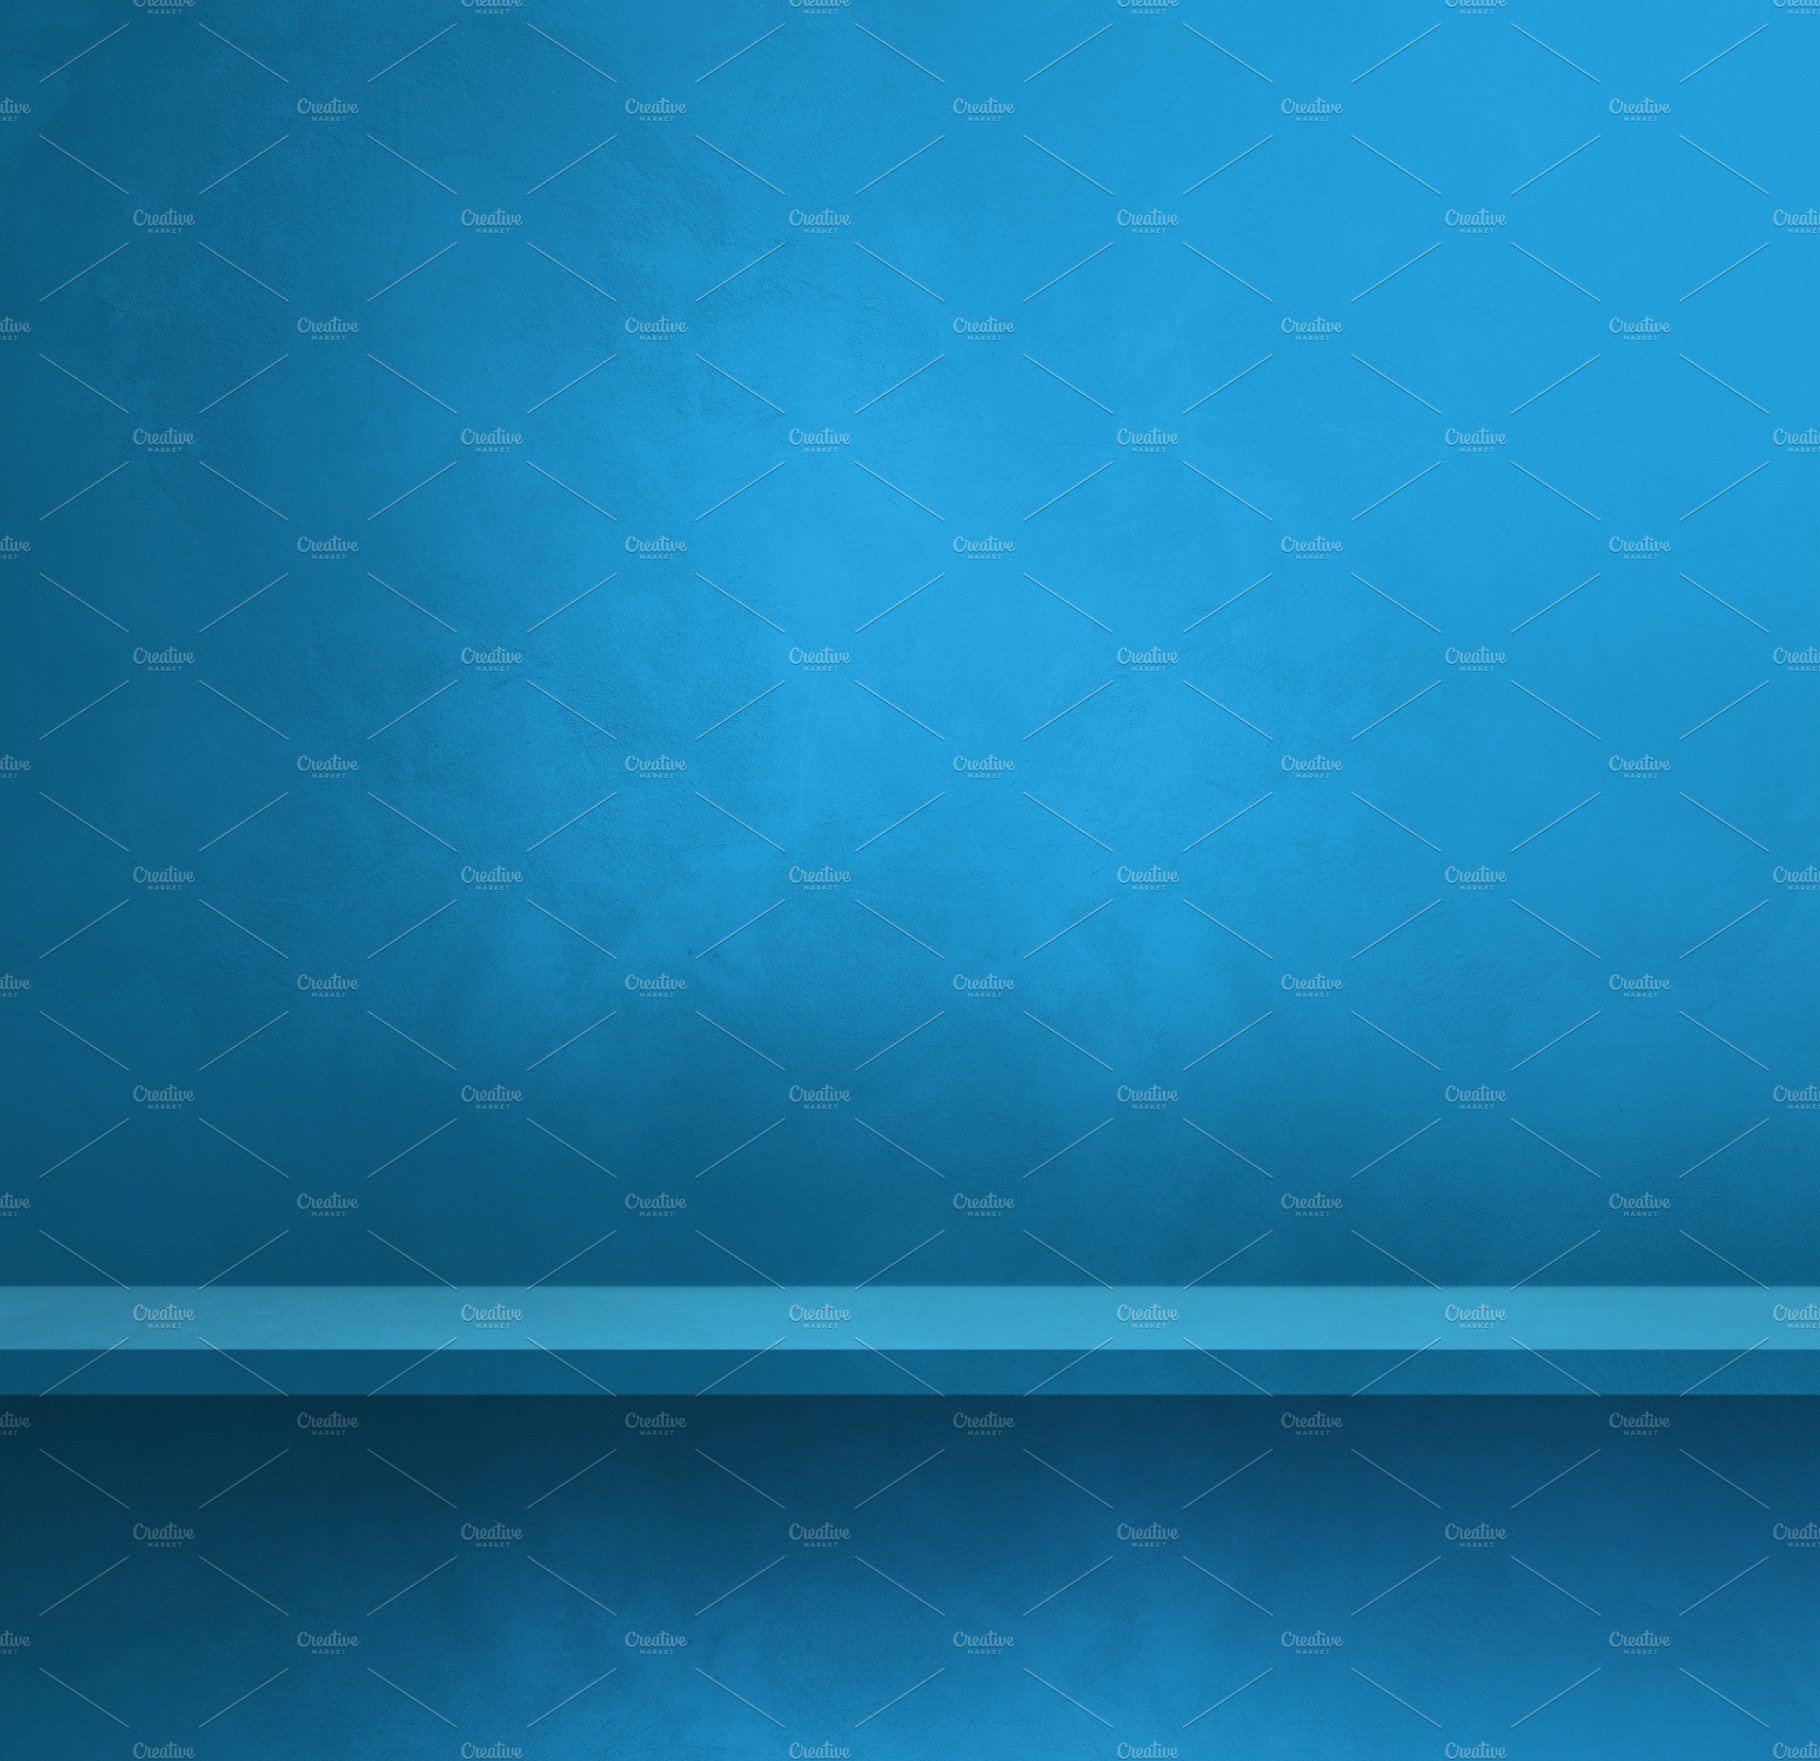 Empty shelf on a blue wall. Background template. Square banner cover image.